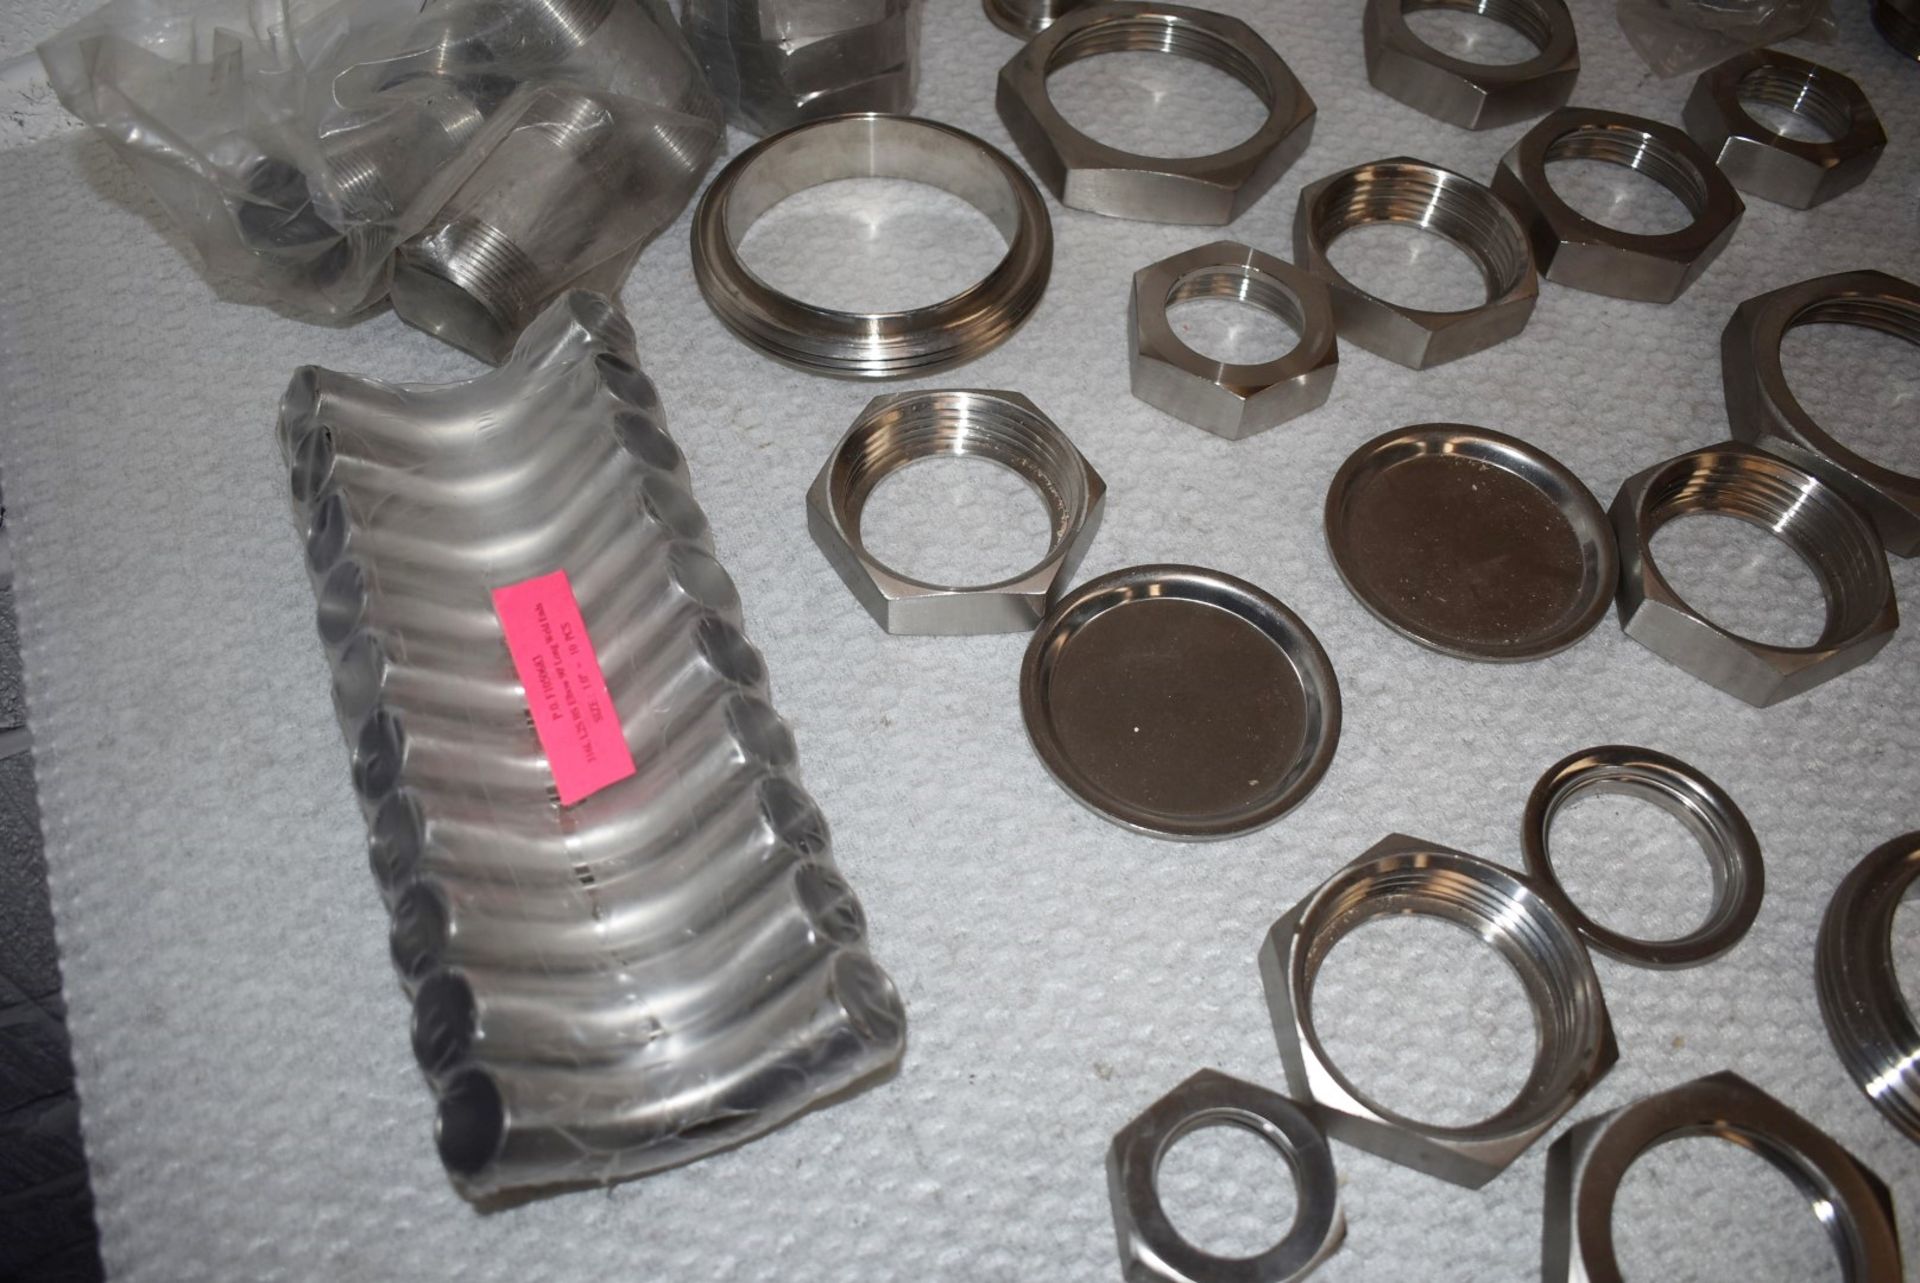 Assorted Job Lot of Stainless Steel Fittings For Brewery Equipment - Includes Approx 140 Pieces - - Image 12 of 18